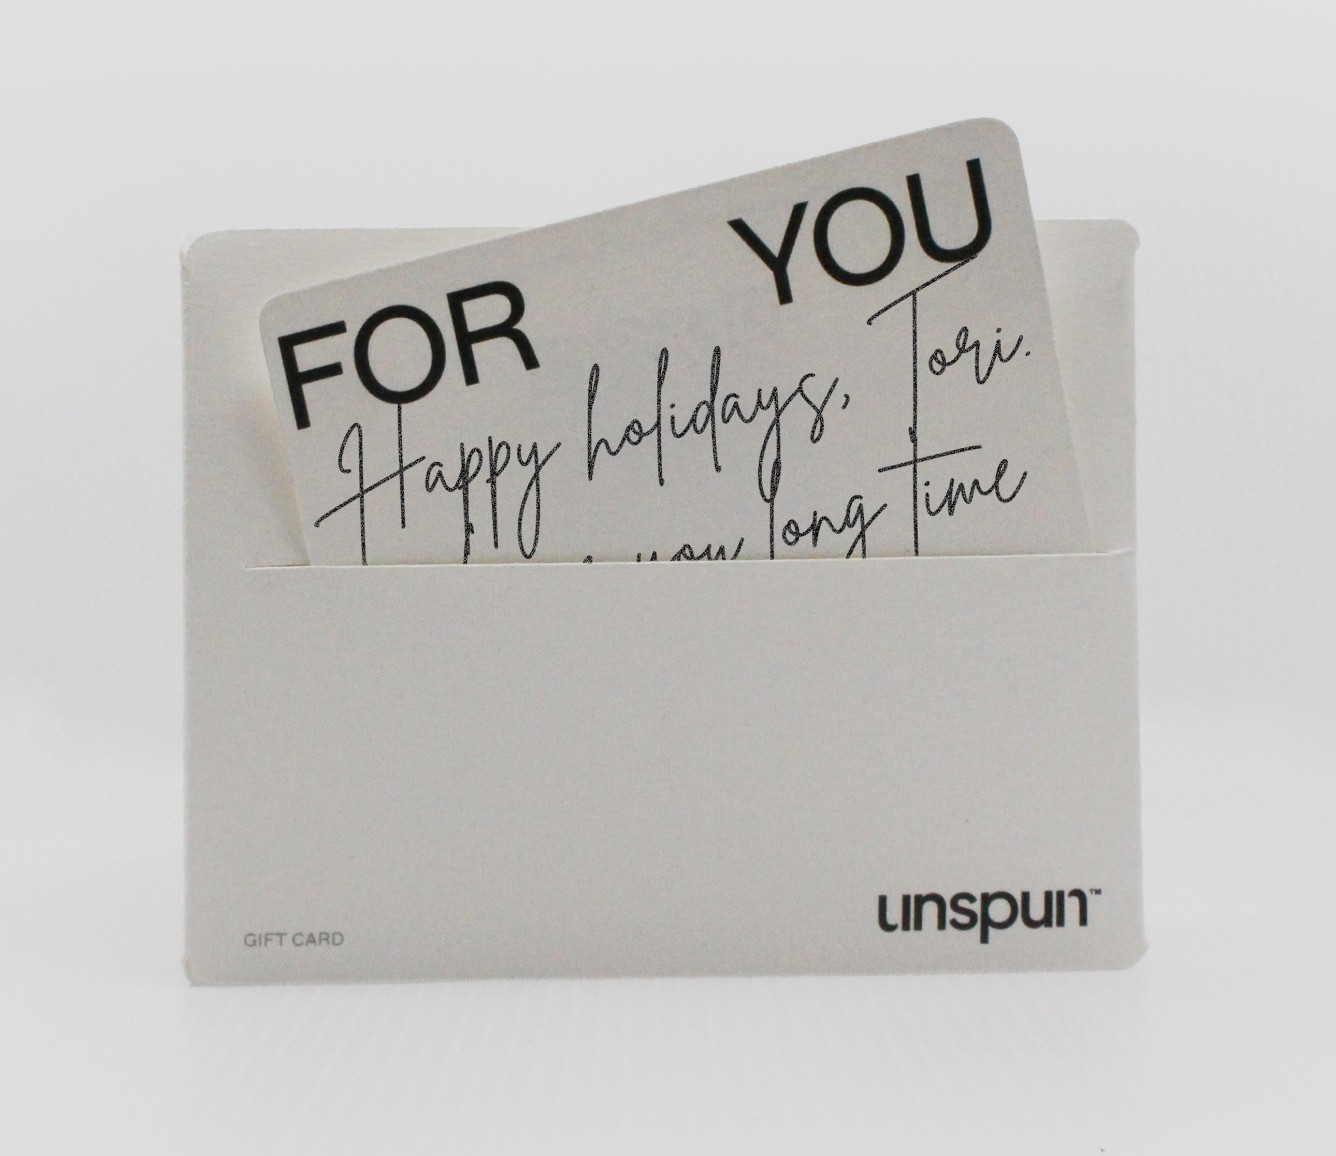 unspun gift card that reads "for you" and has a hand written note